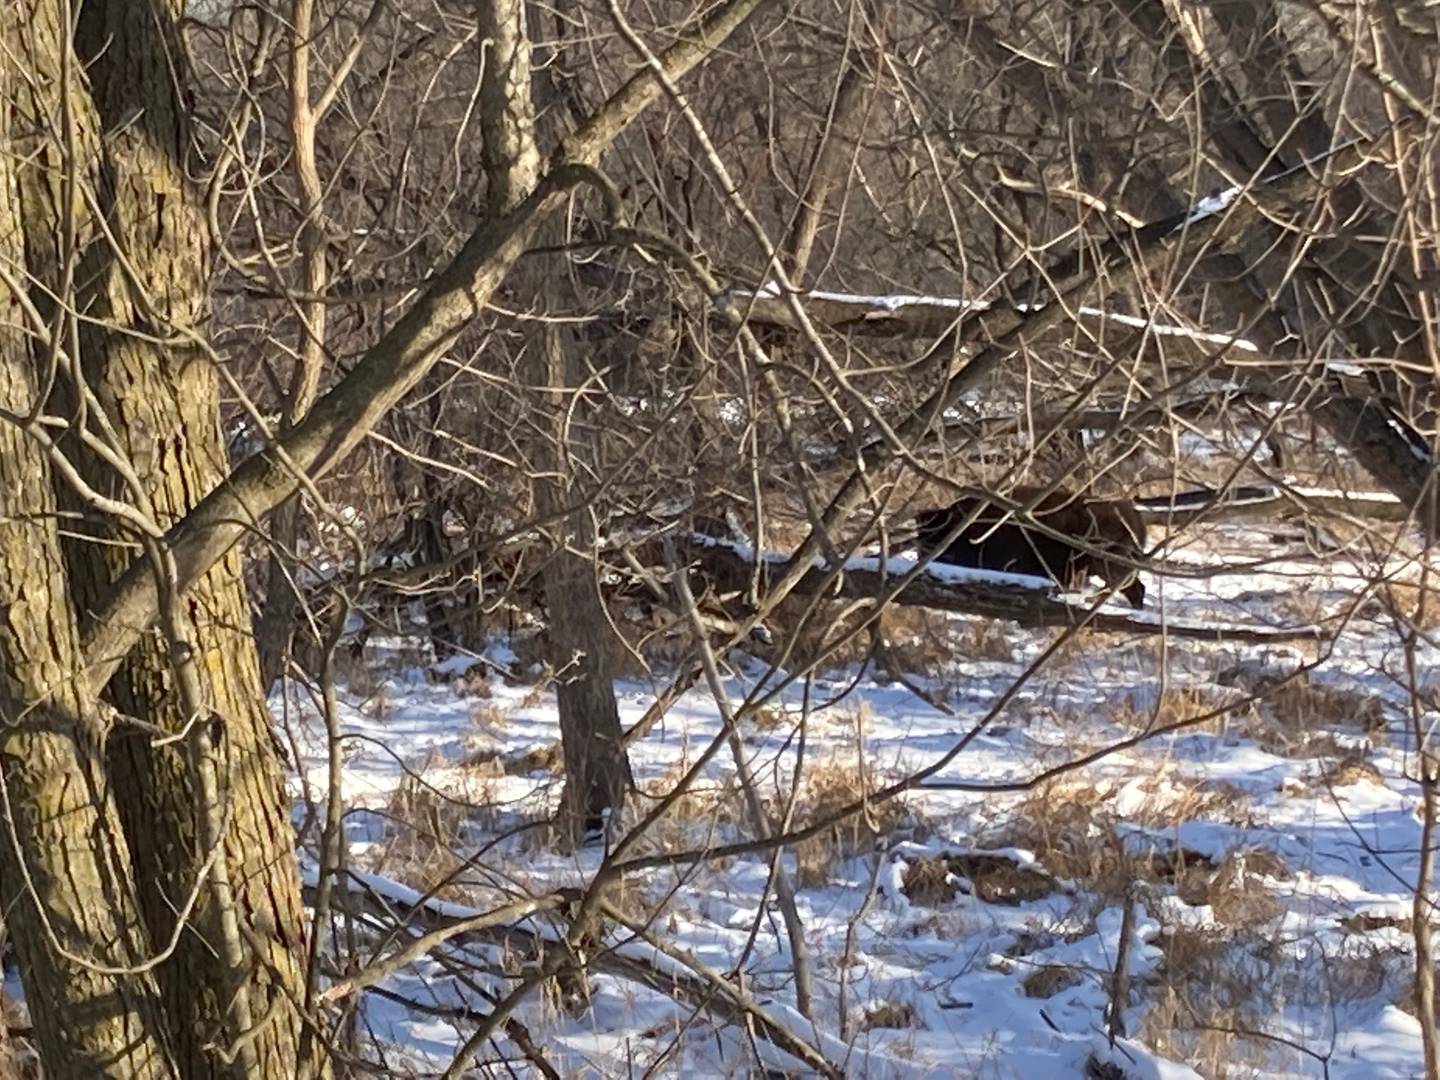 A bison that escaped while en route to Milk & Honey Farmstead in Wauconda was photographed earlier this winter in a nearby forest. The owners have been aware of the bison's location but the process of bringing them onto the farm is complicated, they said.